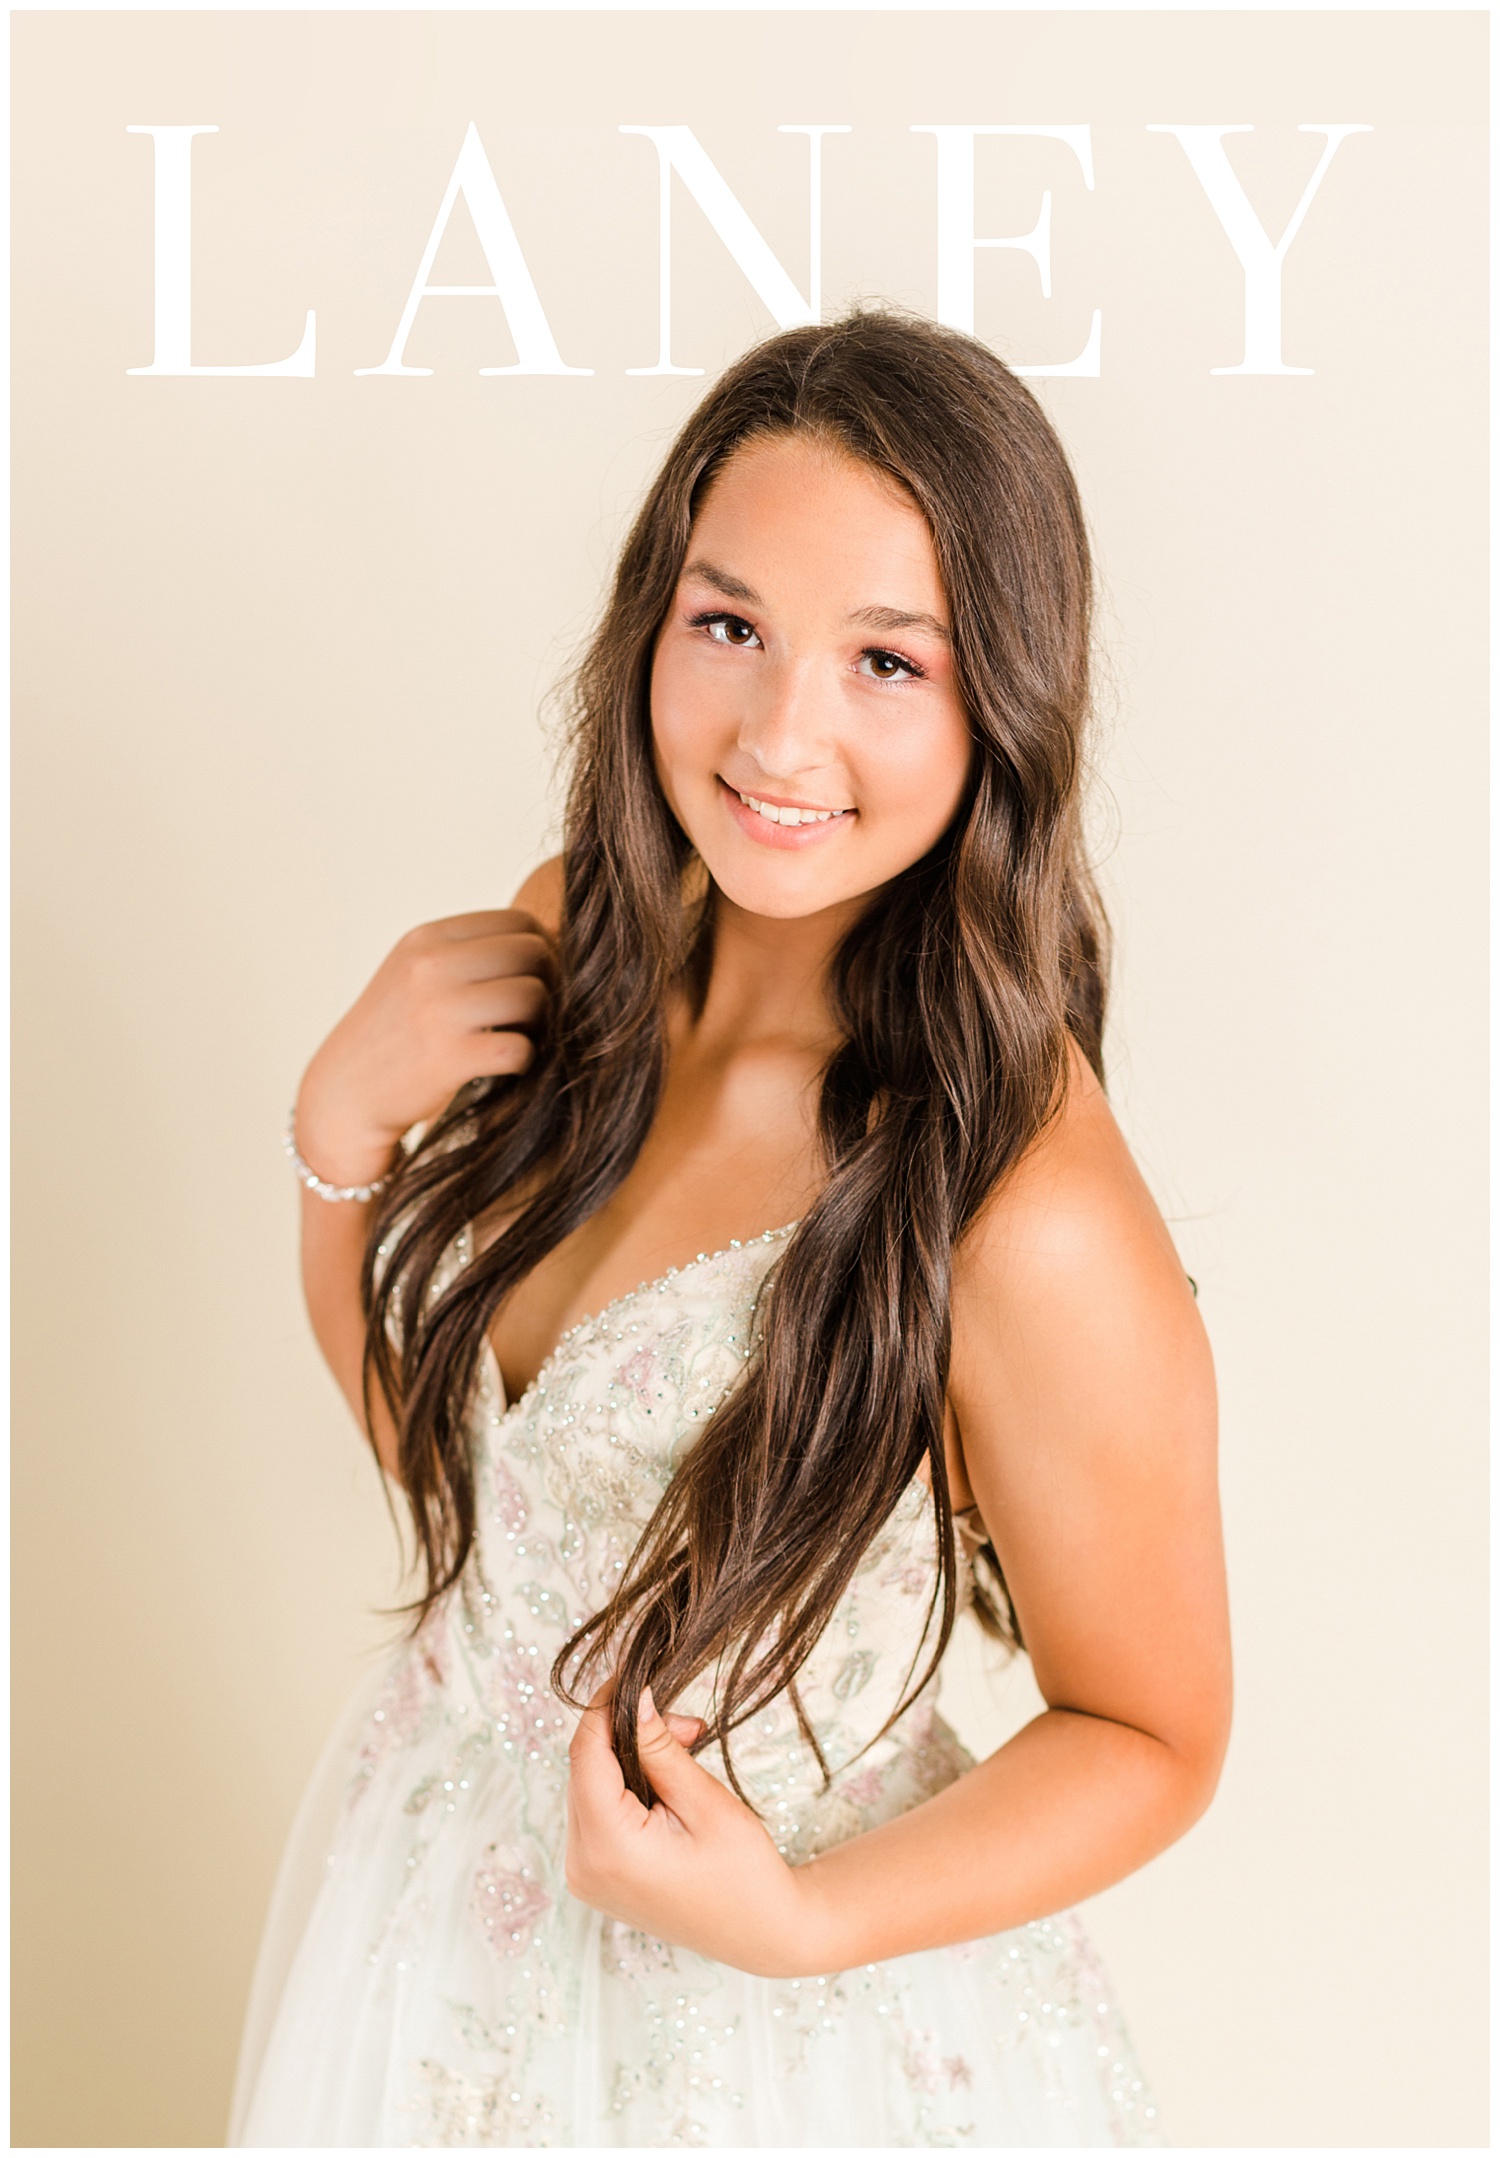 Laney poses in a Morilee prom dress for a magazine cover | CB Studio